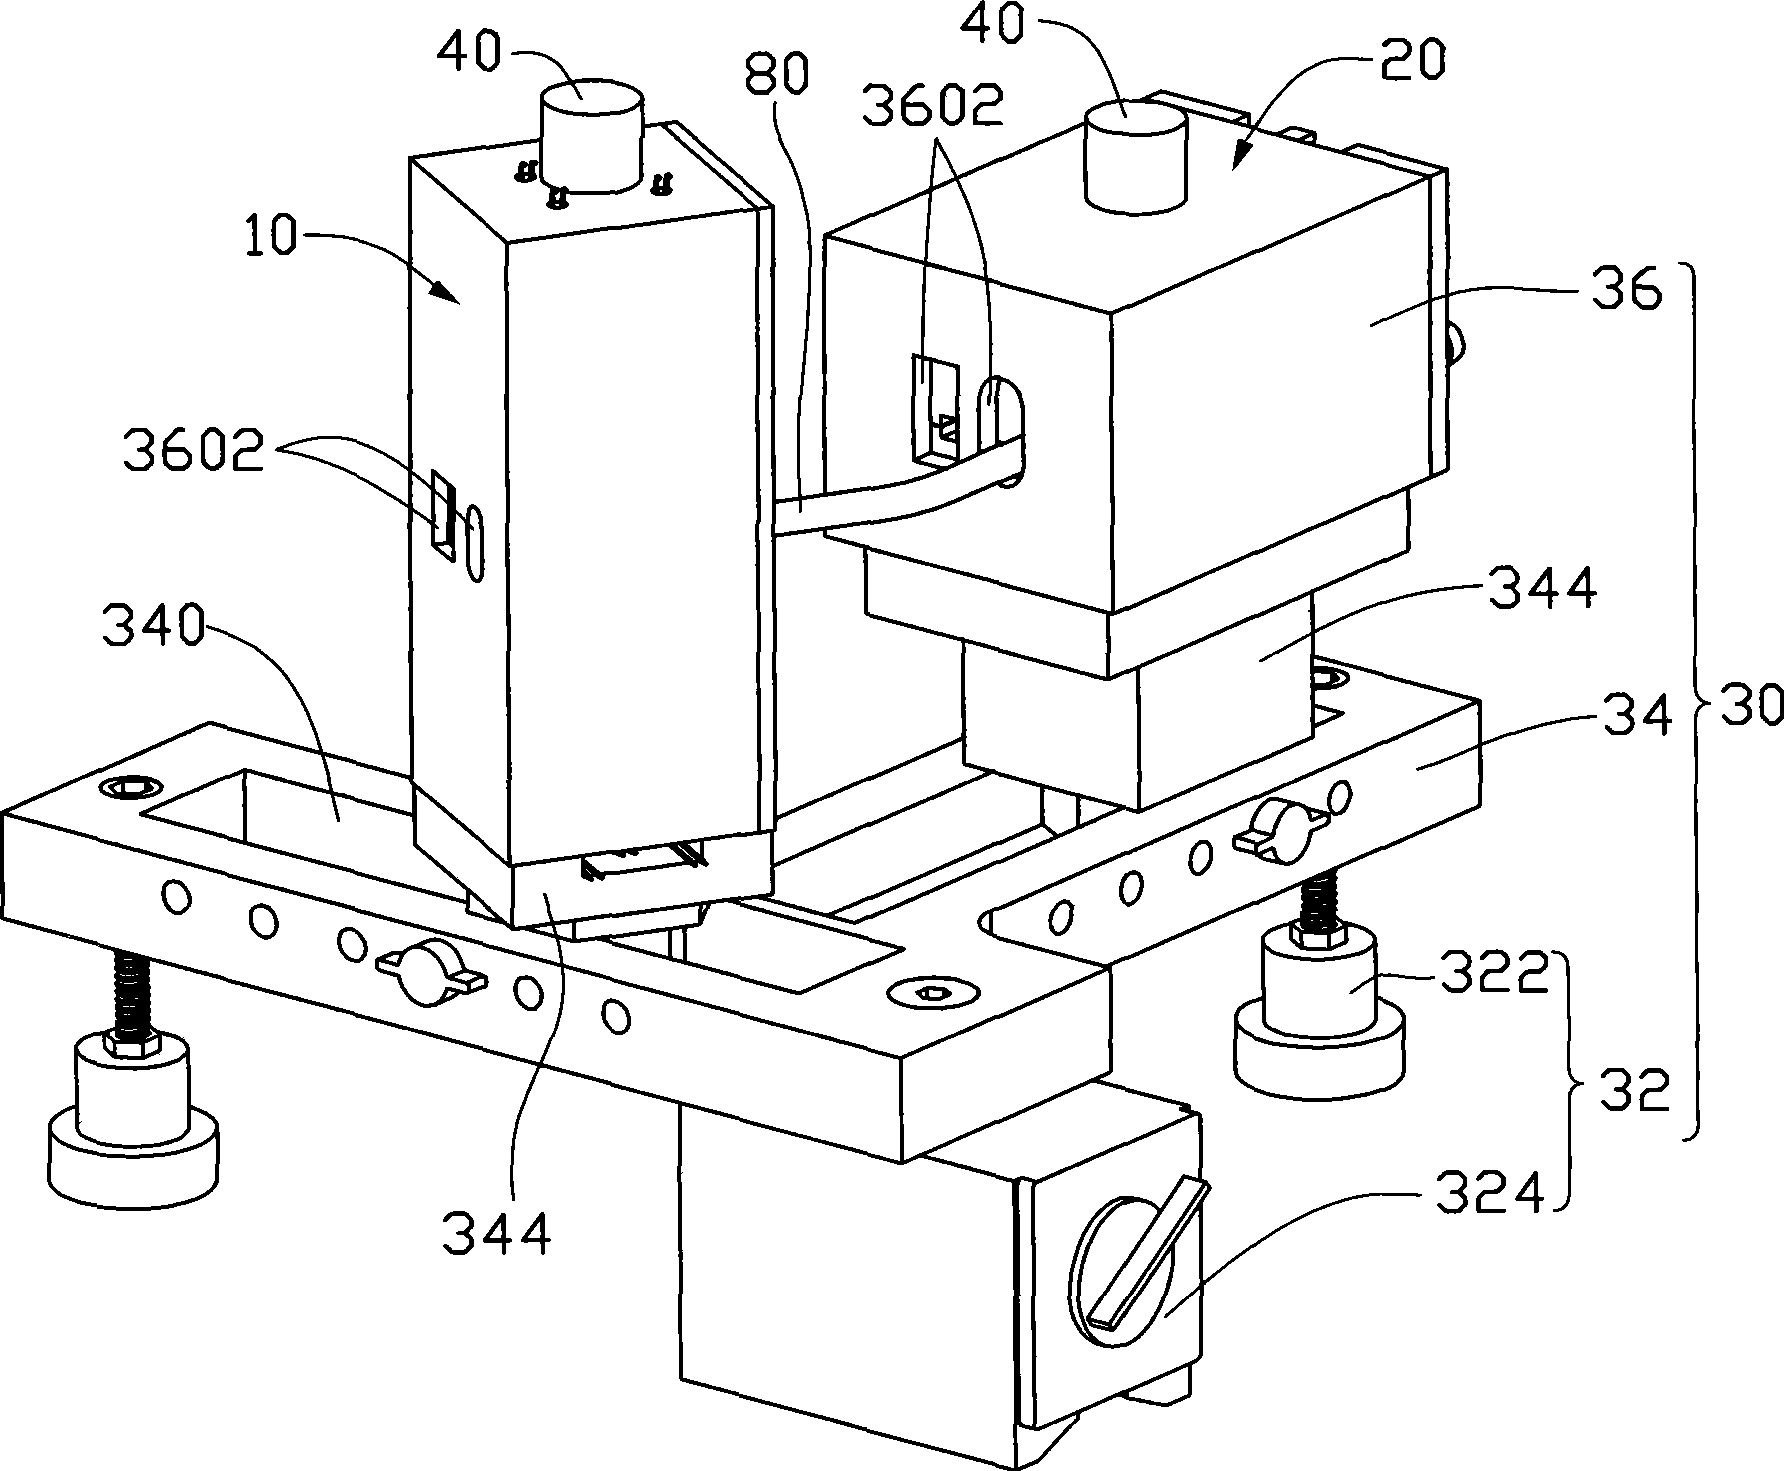 Heat pipe performance detection apparatus